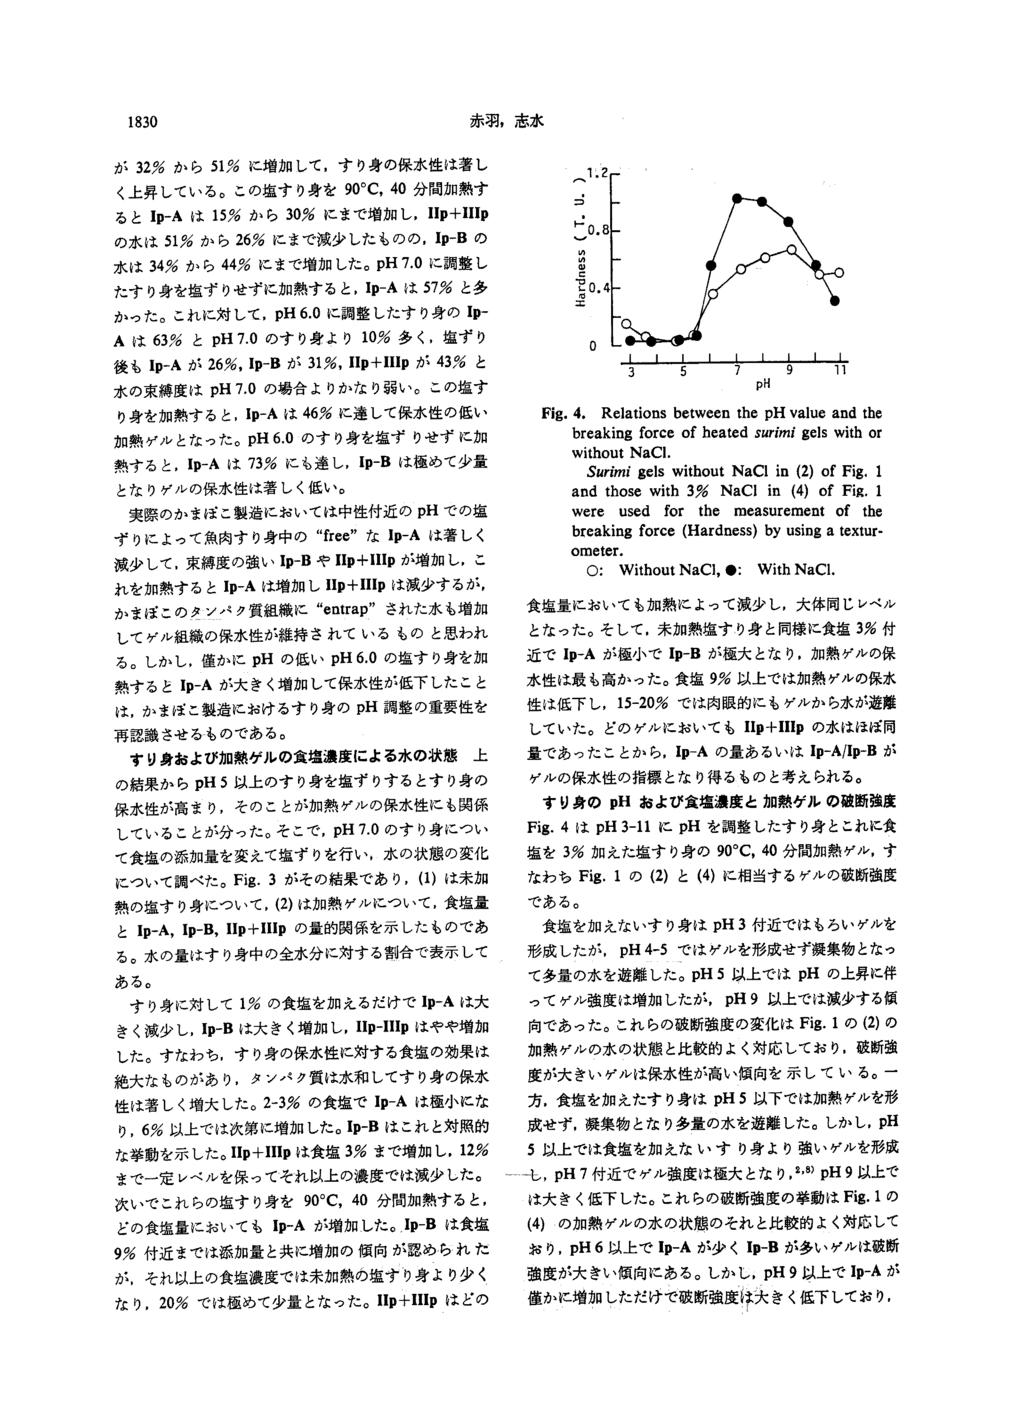 Fig. 4. Relations between the ph value and the breaking force of heated surimi gels with or without NaCl. Surimi gels without NaCI in (2) of Fig.